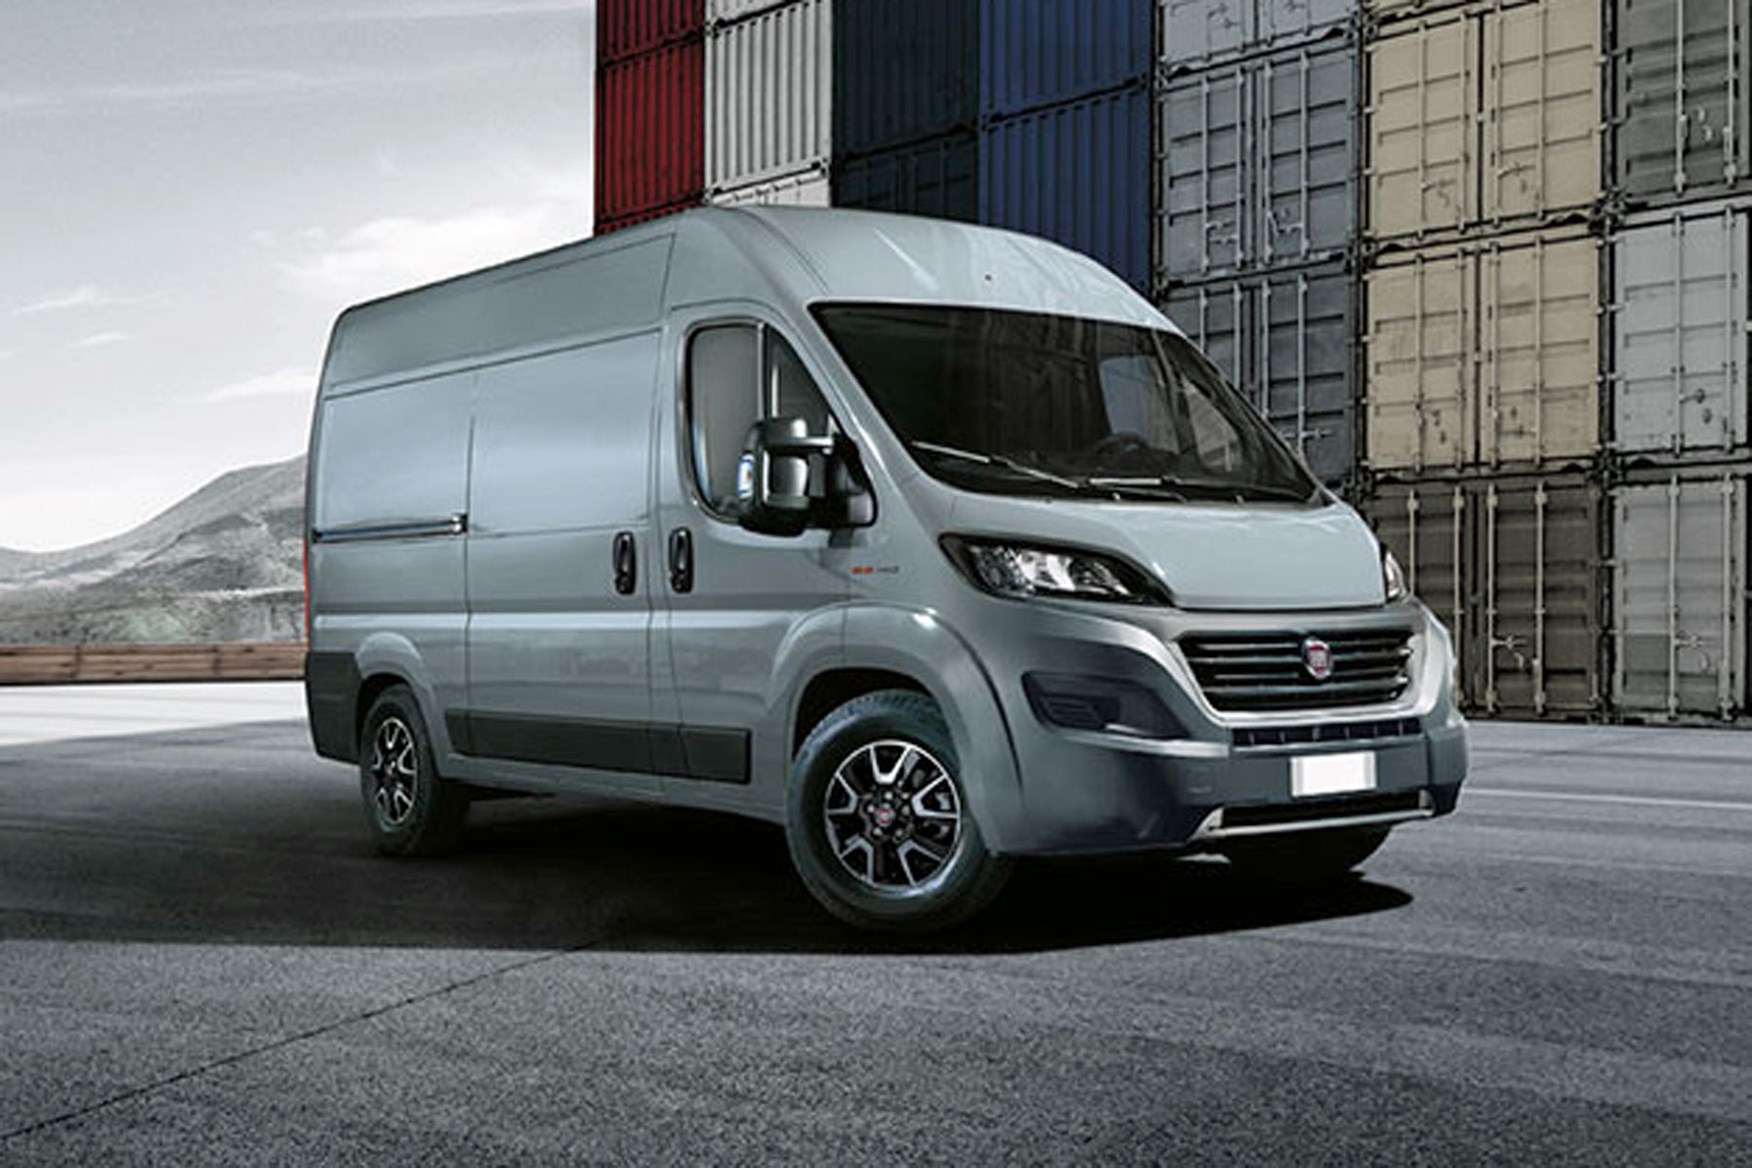 Fiat Ducato Shadow – stylish van you didn't know you were looking for | Parkers